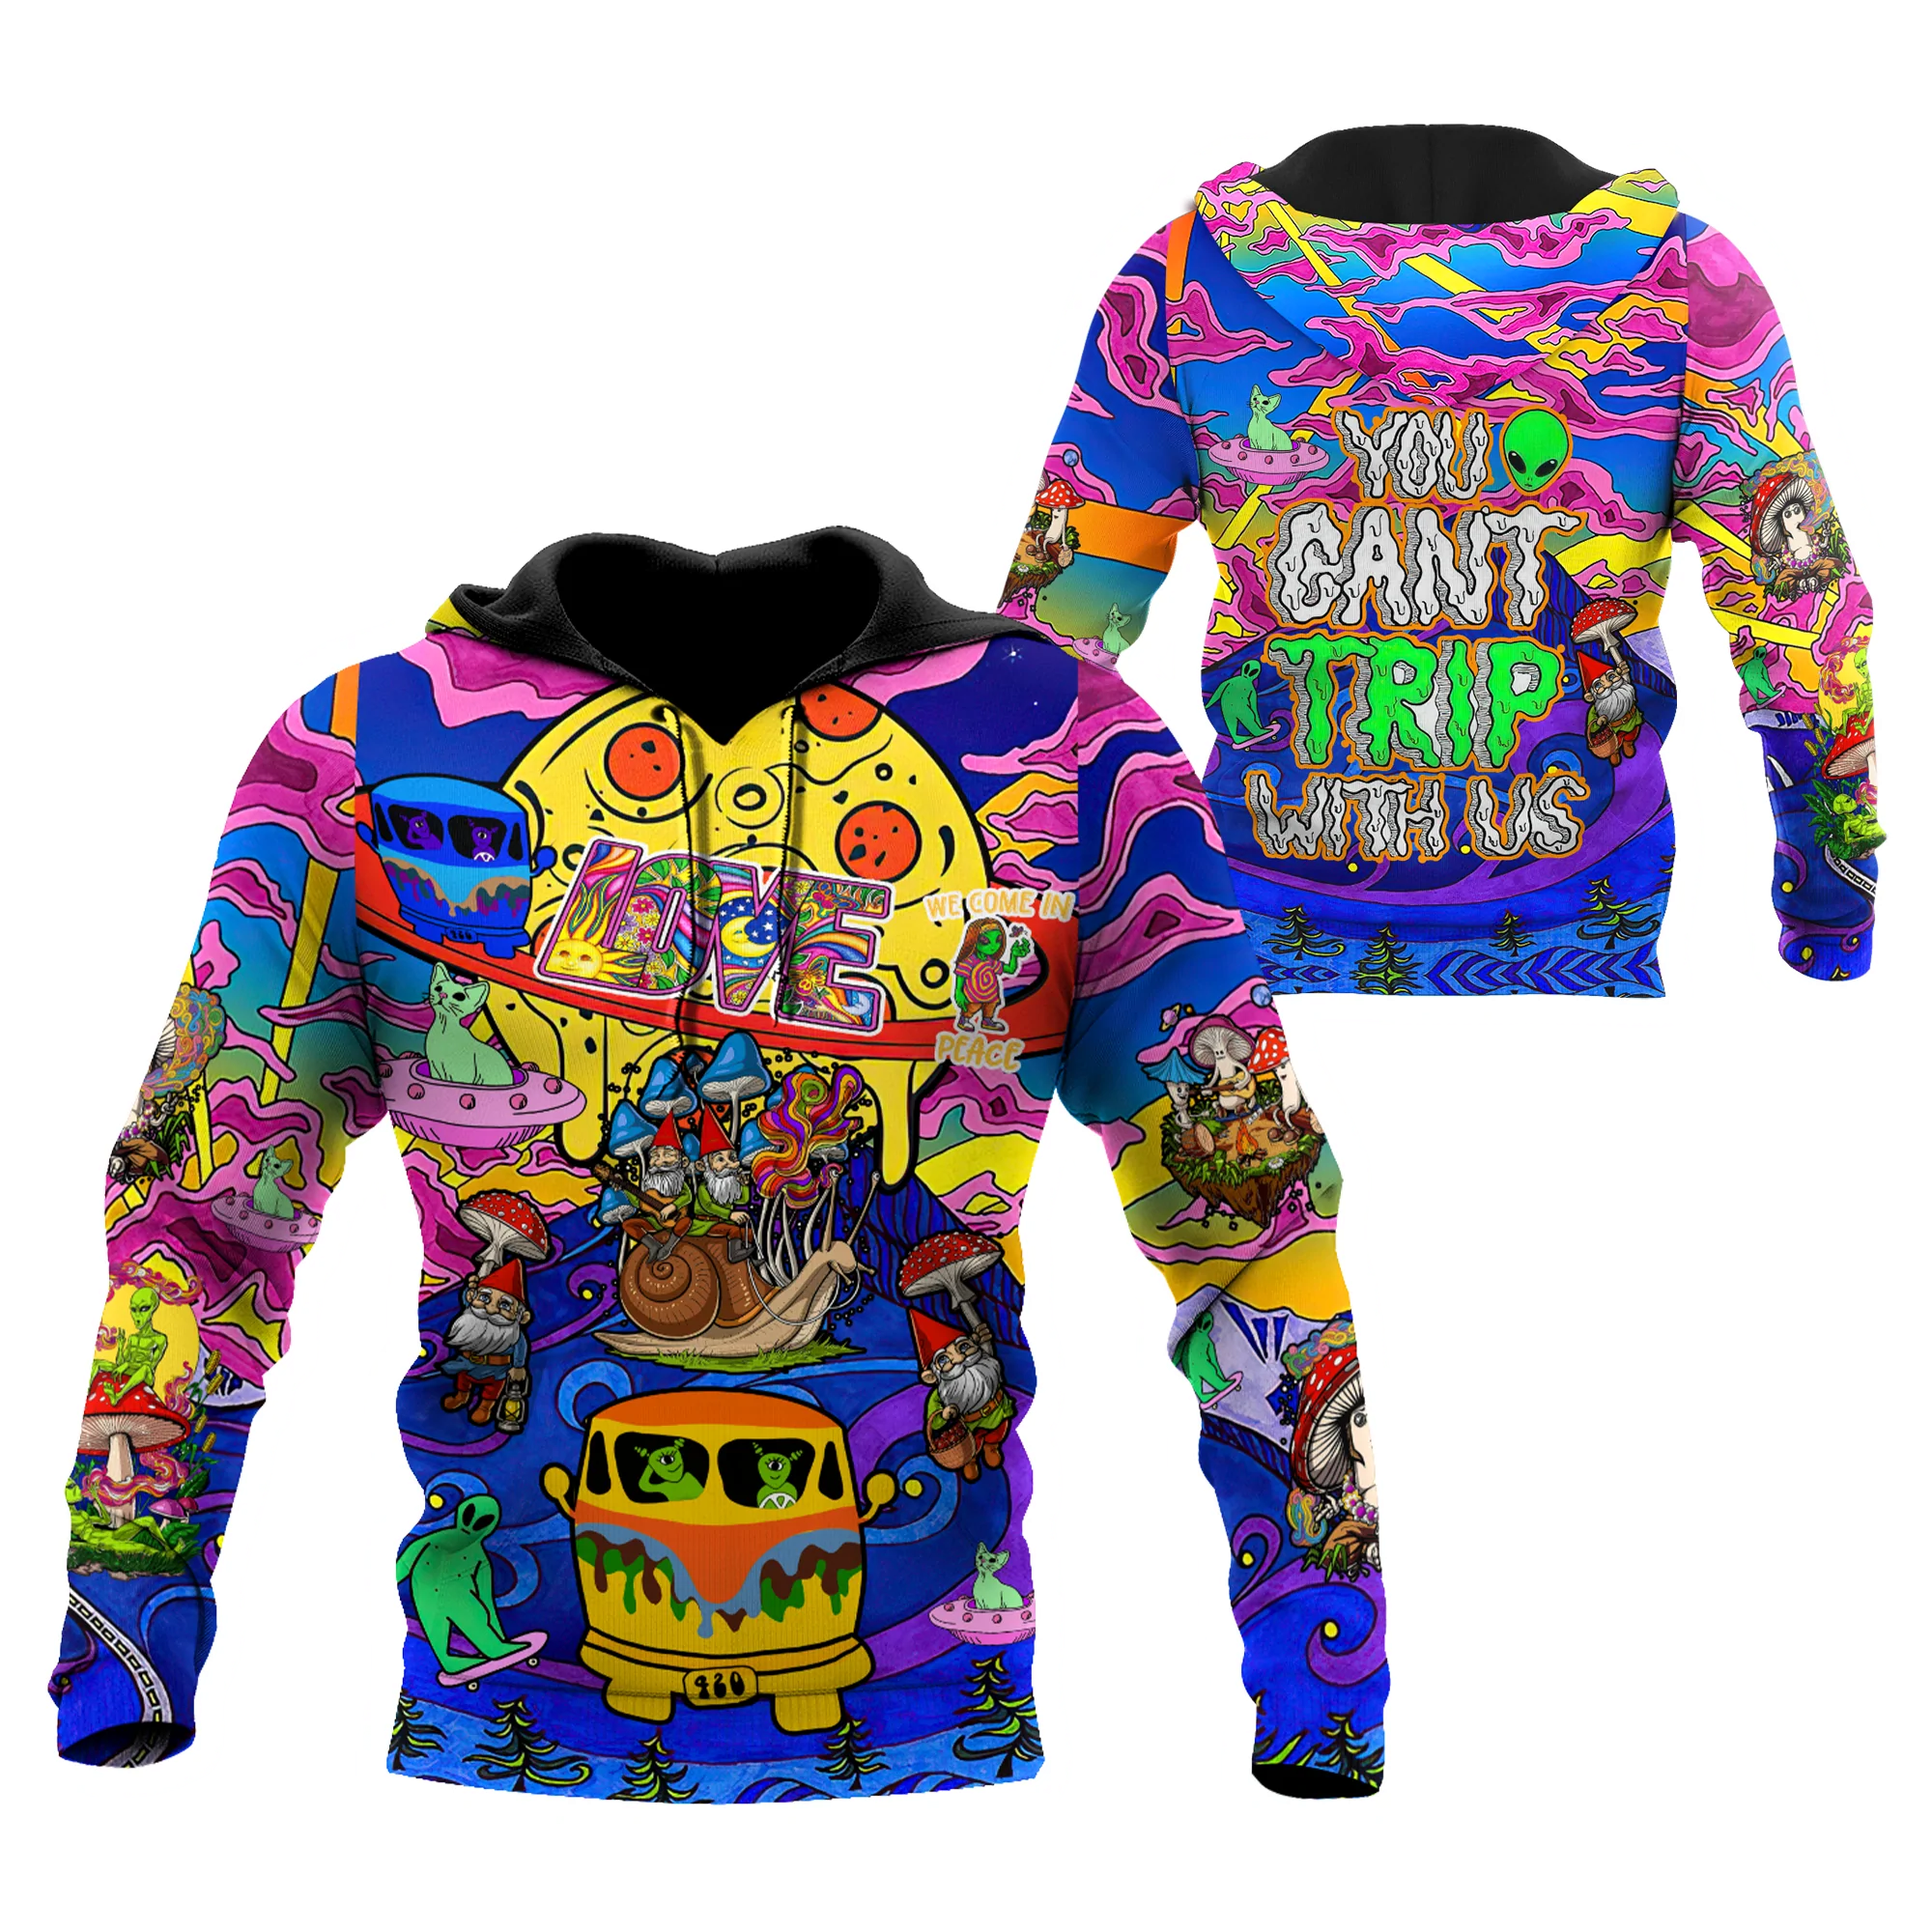 Trip To Galaxy Hippie Guys Hoodie For Men And Women We Come In Peace Hippie Hoodies